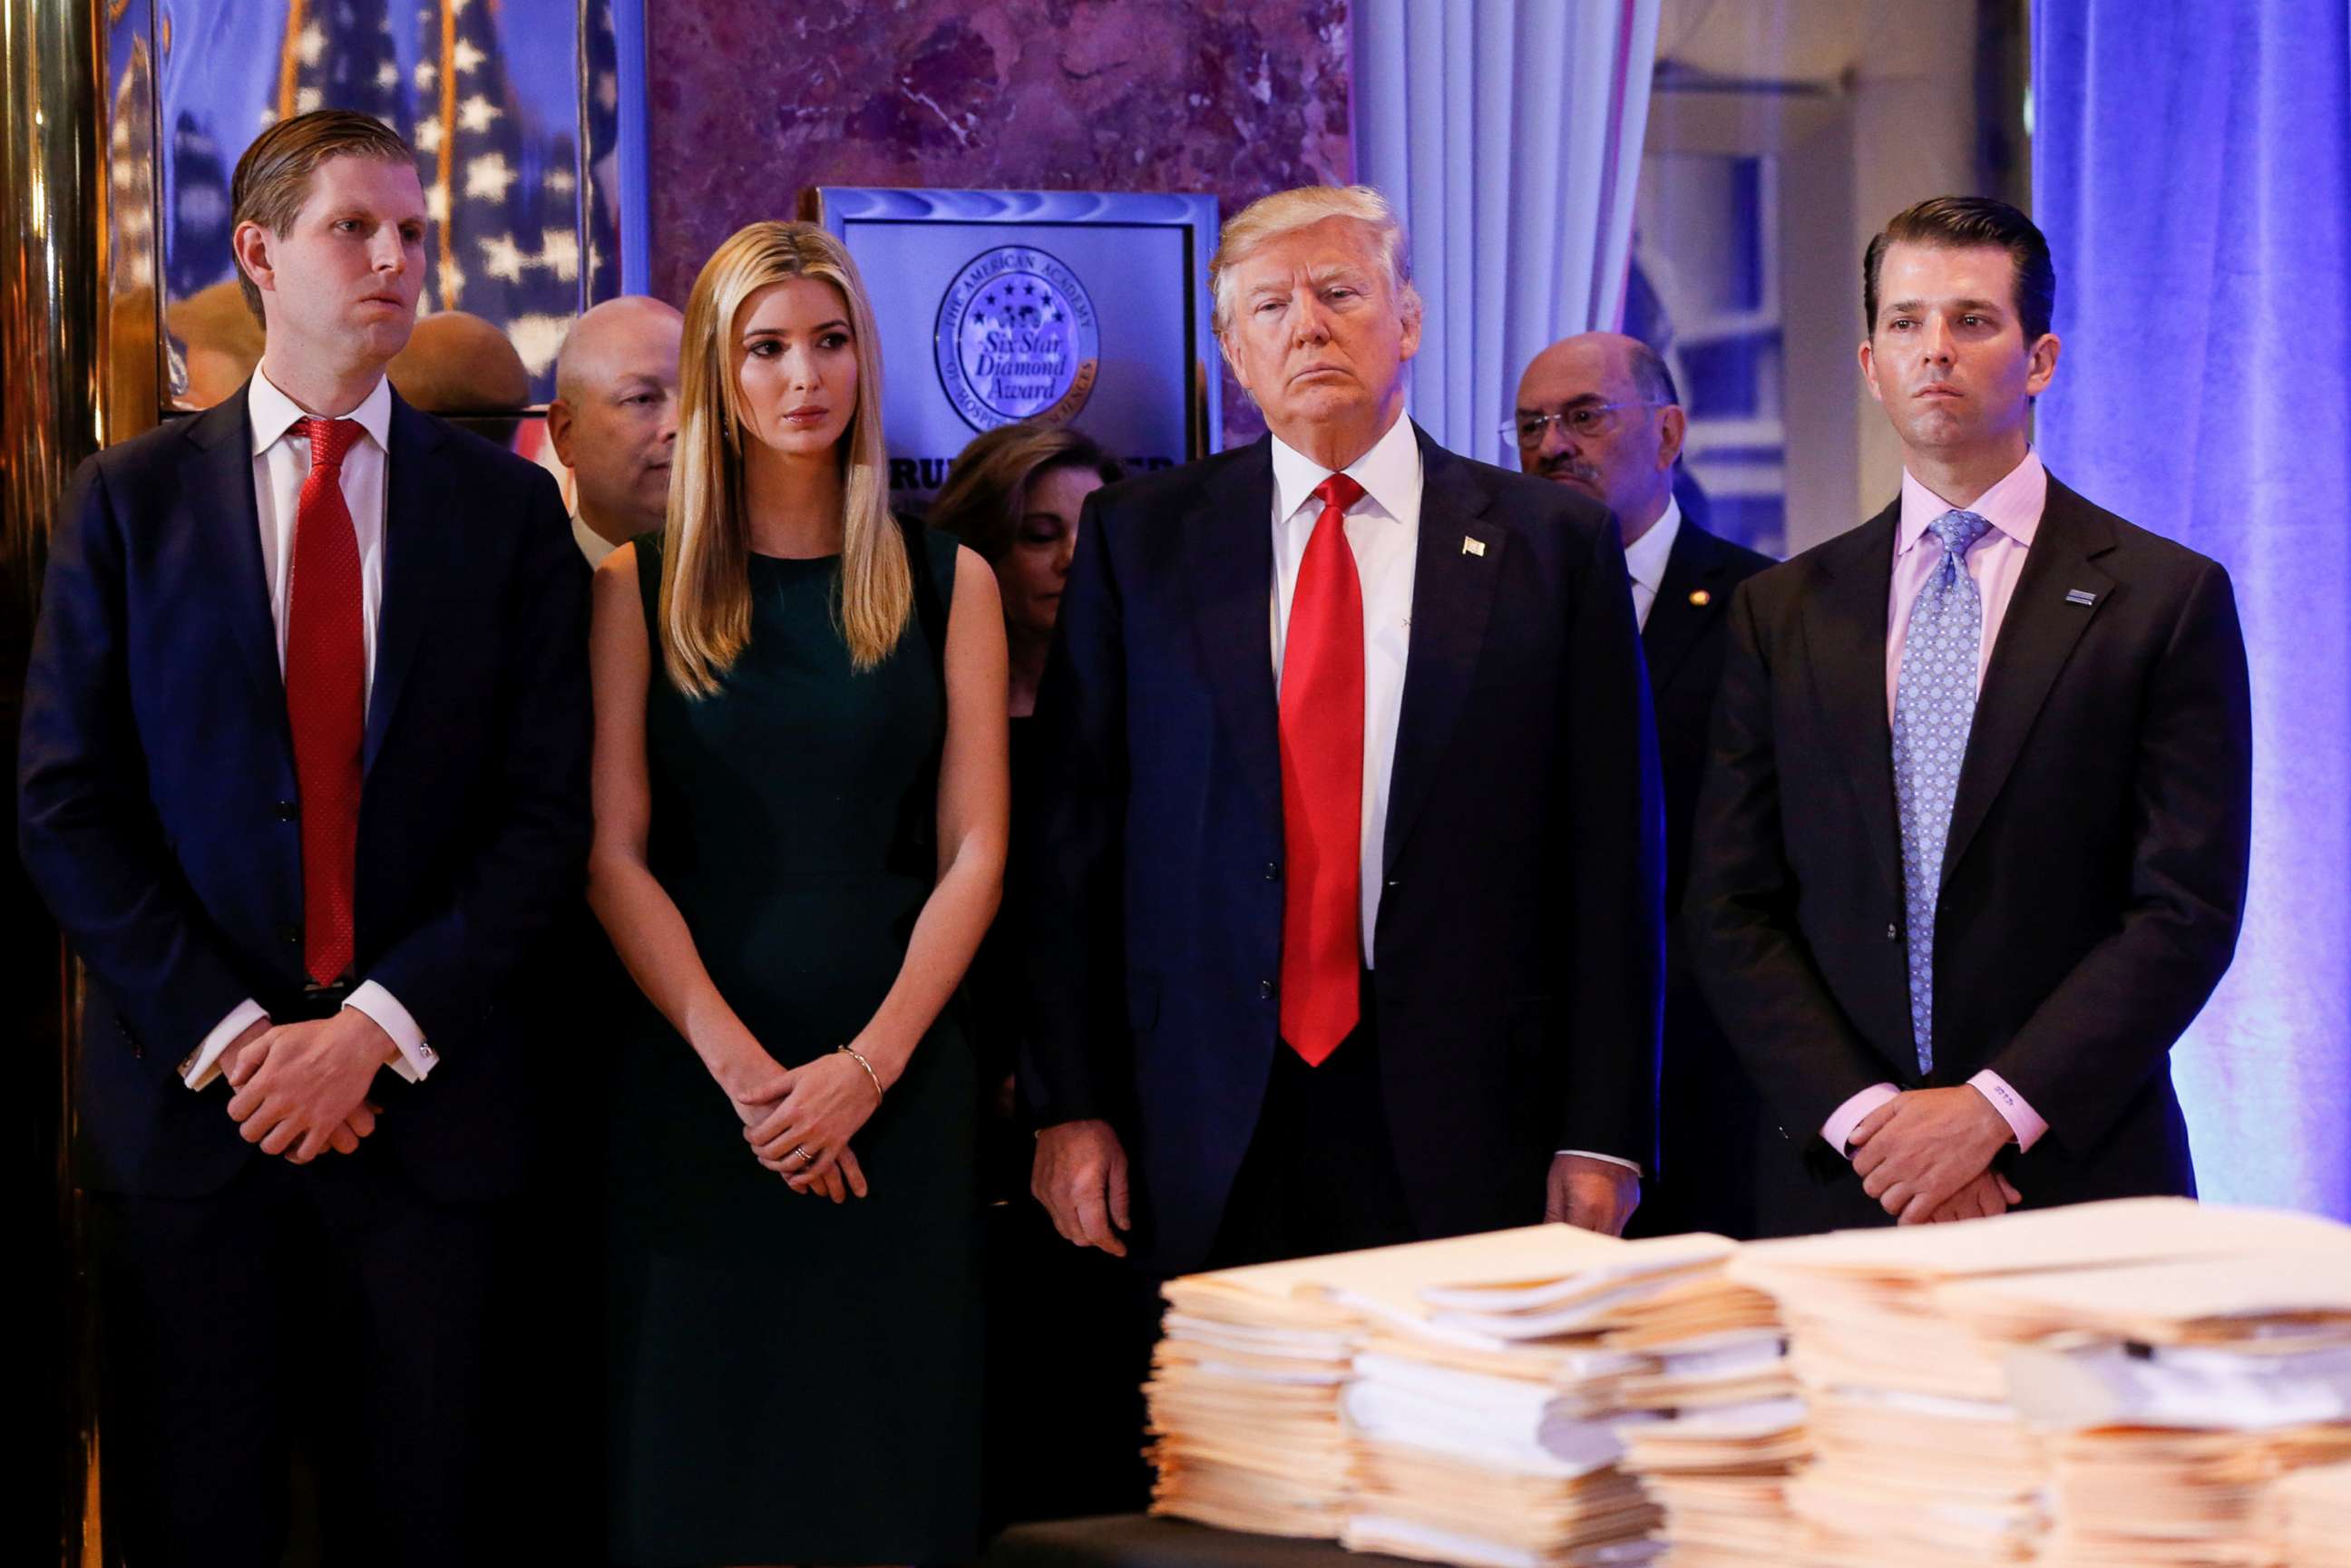 PHOTO: President-elect Donald Trump stands surrounded by his son Eric Trump, daughter Ivanka and son Donald Trump Jr., ahead of a press conference in Trump Tower in New York in this Jan. 11, 2017 file photo.